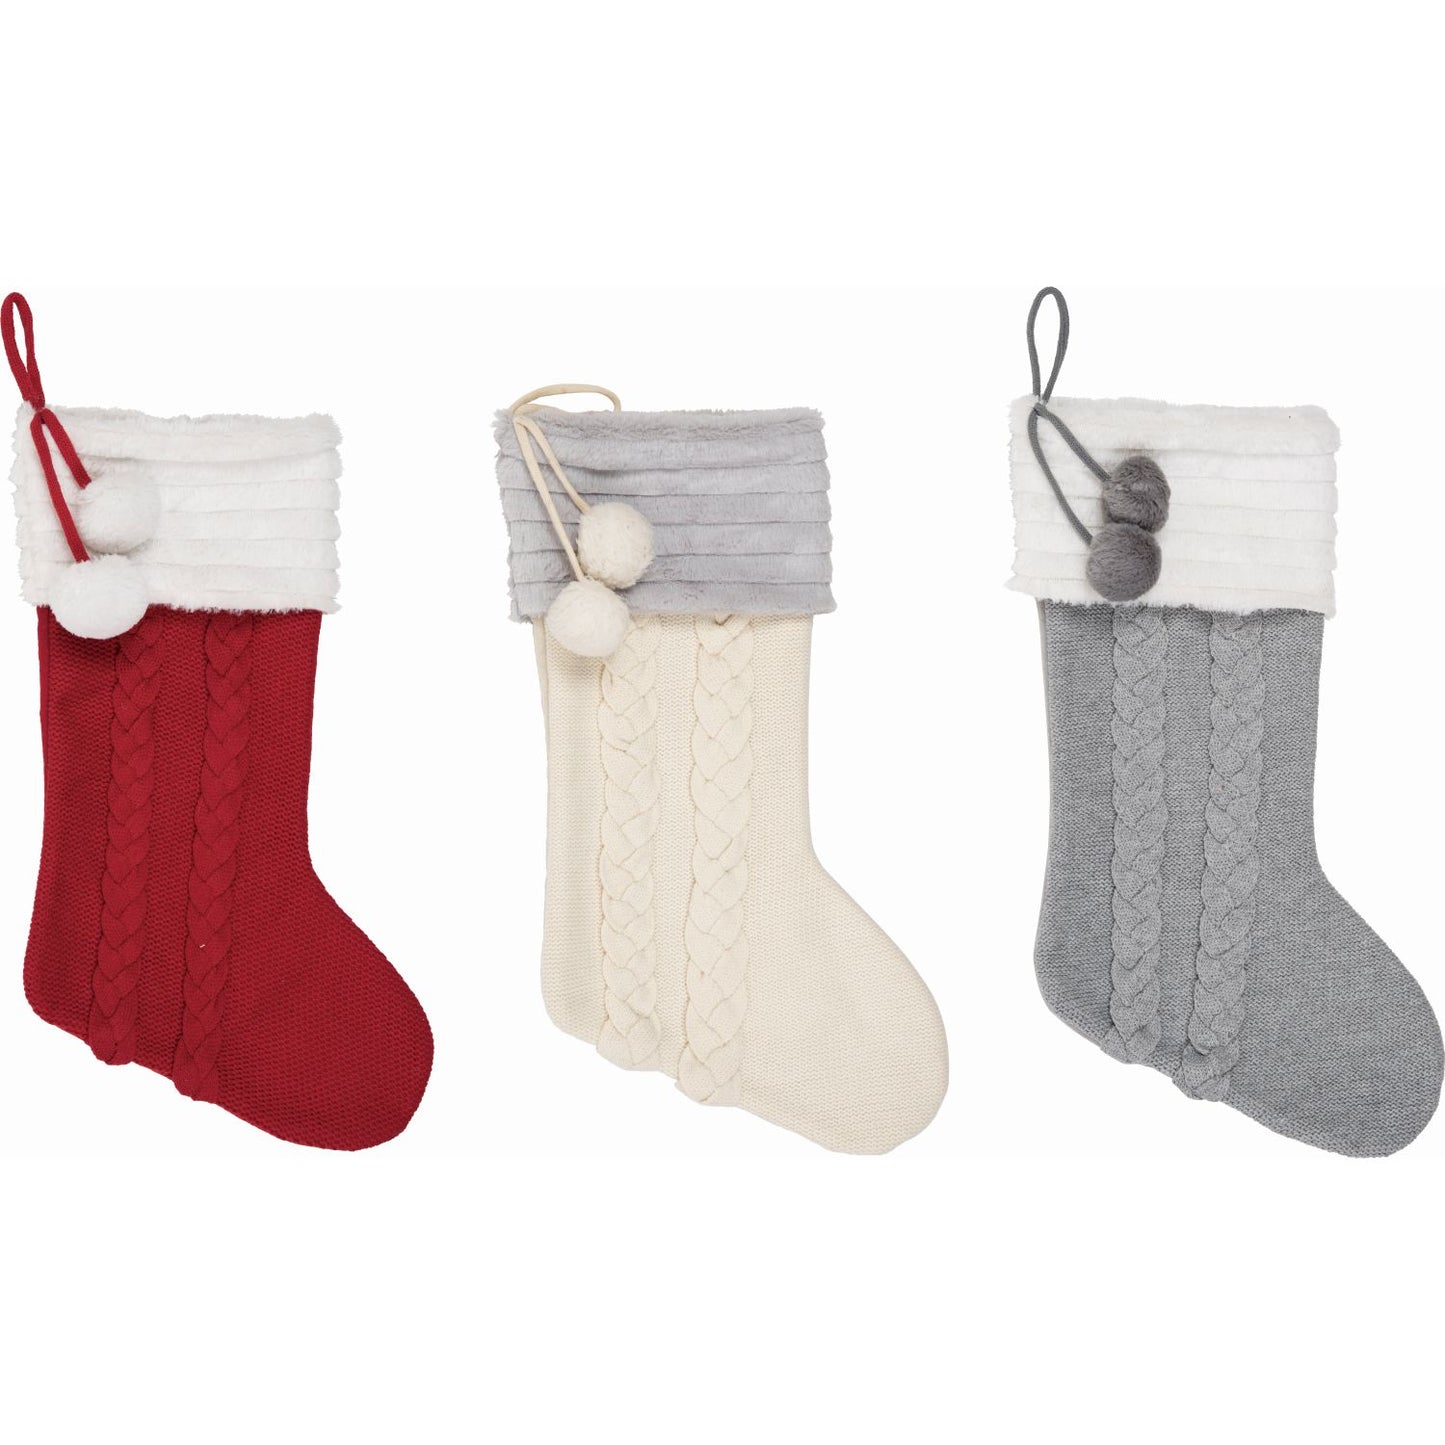 Transpac Cable Knit Stocking, Set Of 3, Assortment